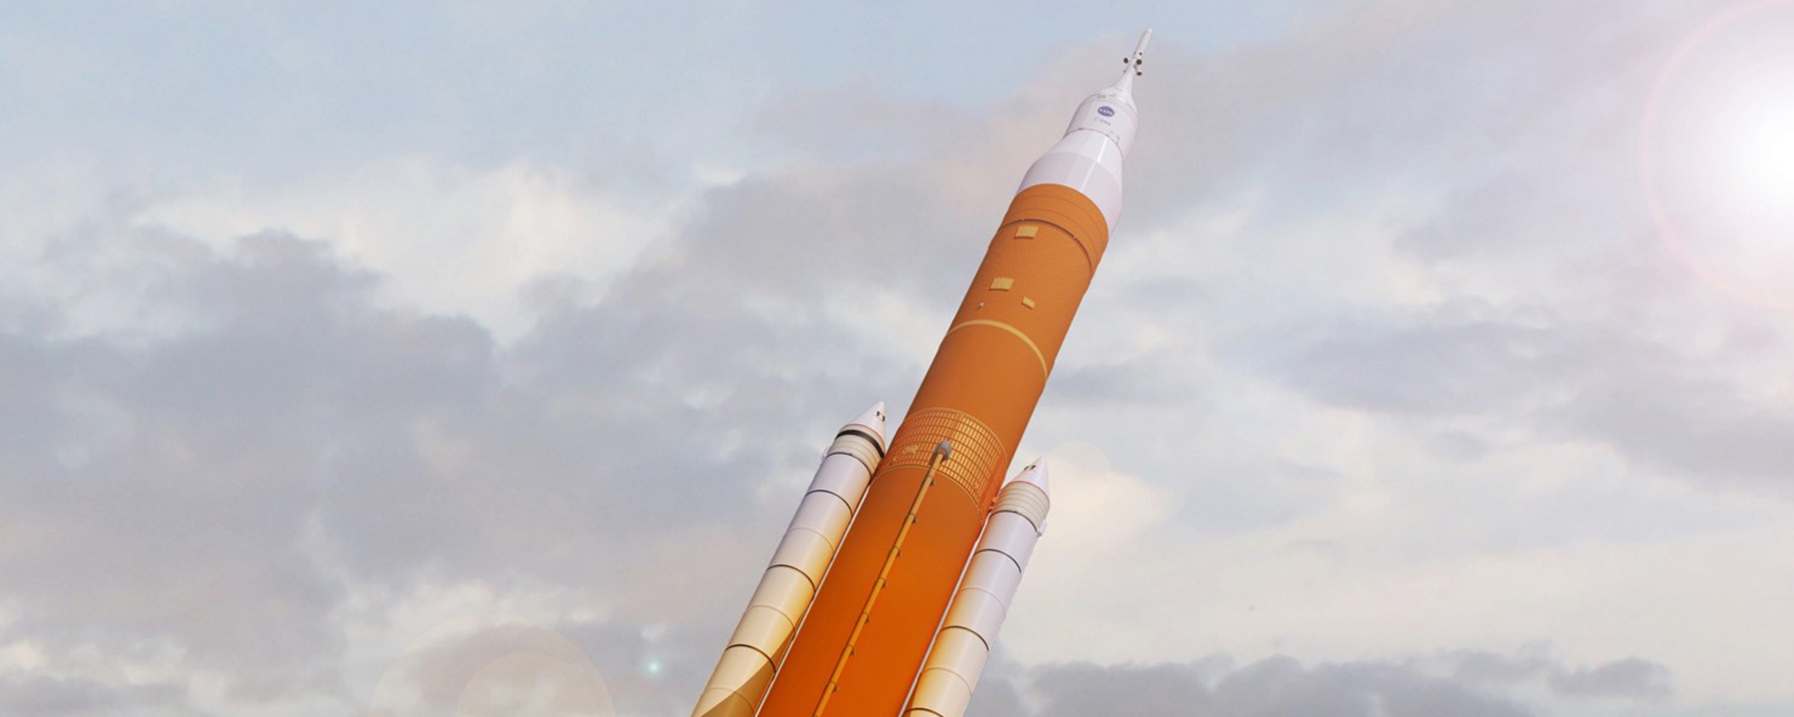 Artist Concept of the Space Launch System Launching